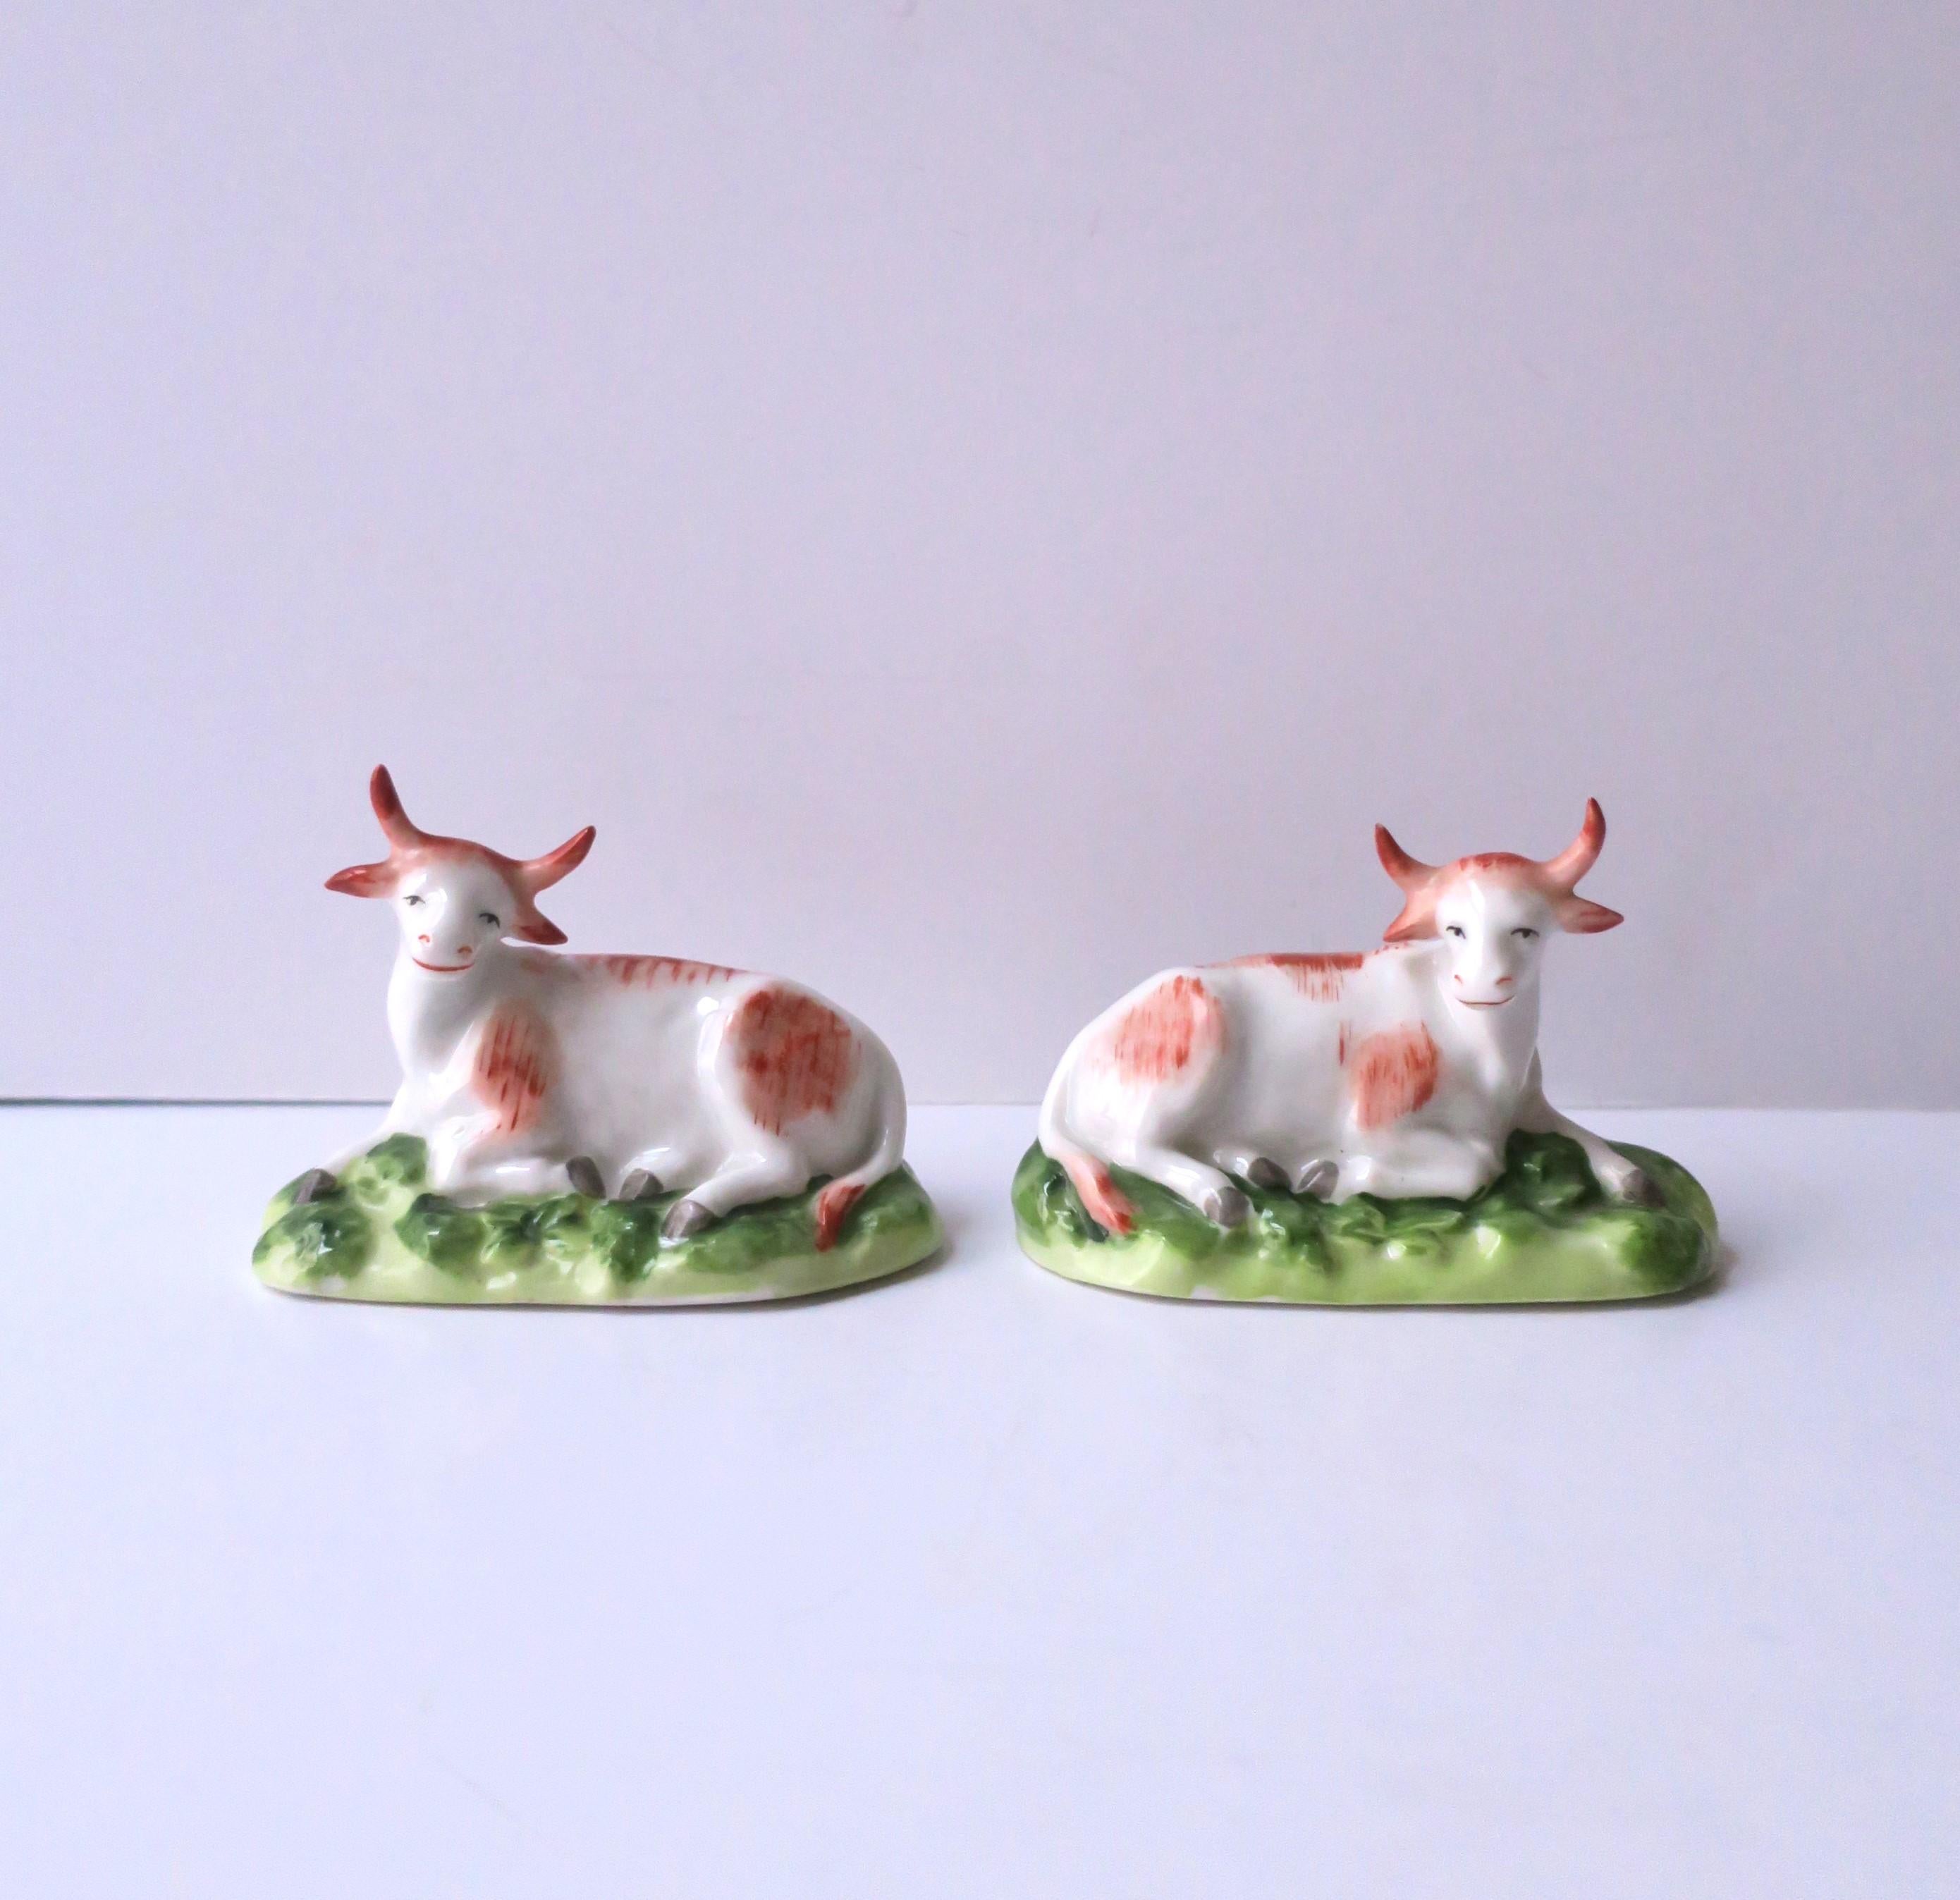 A beautiful and rare pair/set of antique English porcelain hand-painted cows by Chelsea Porcelain company, circa 18th-century, 1756 - 1769, England. Cows/bovine with detailed horns and ears are shown relaxing lying down on green grass pasture, tail